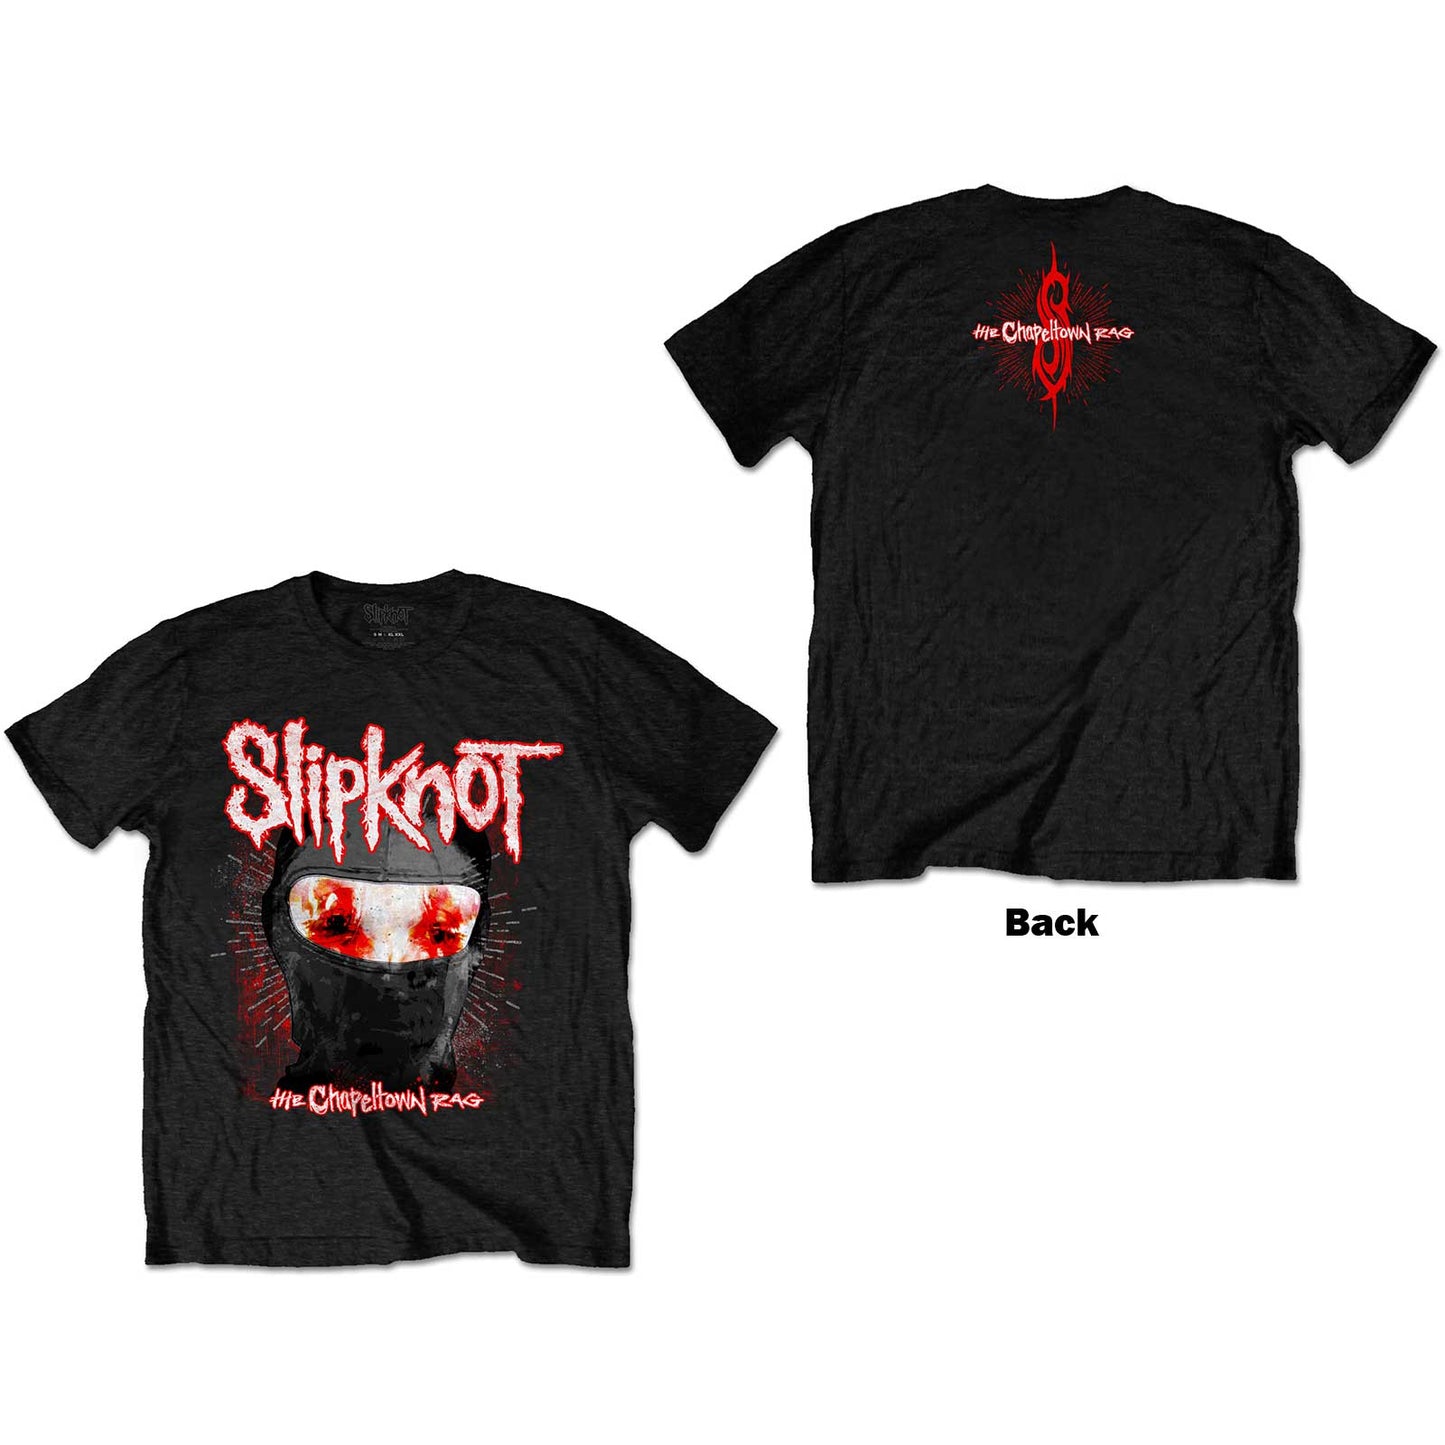 Slipknot T-Shirt - The Chapeltown Rag With Back Print (Unisex) - Front and Back